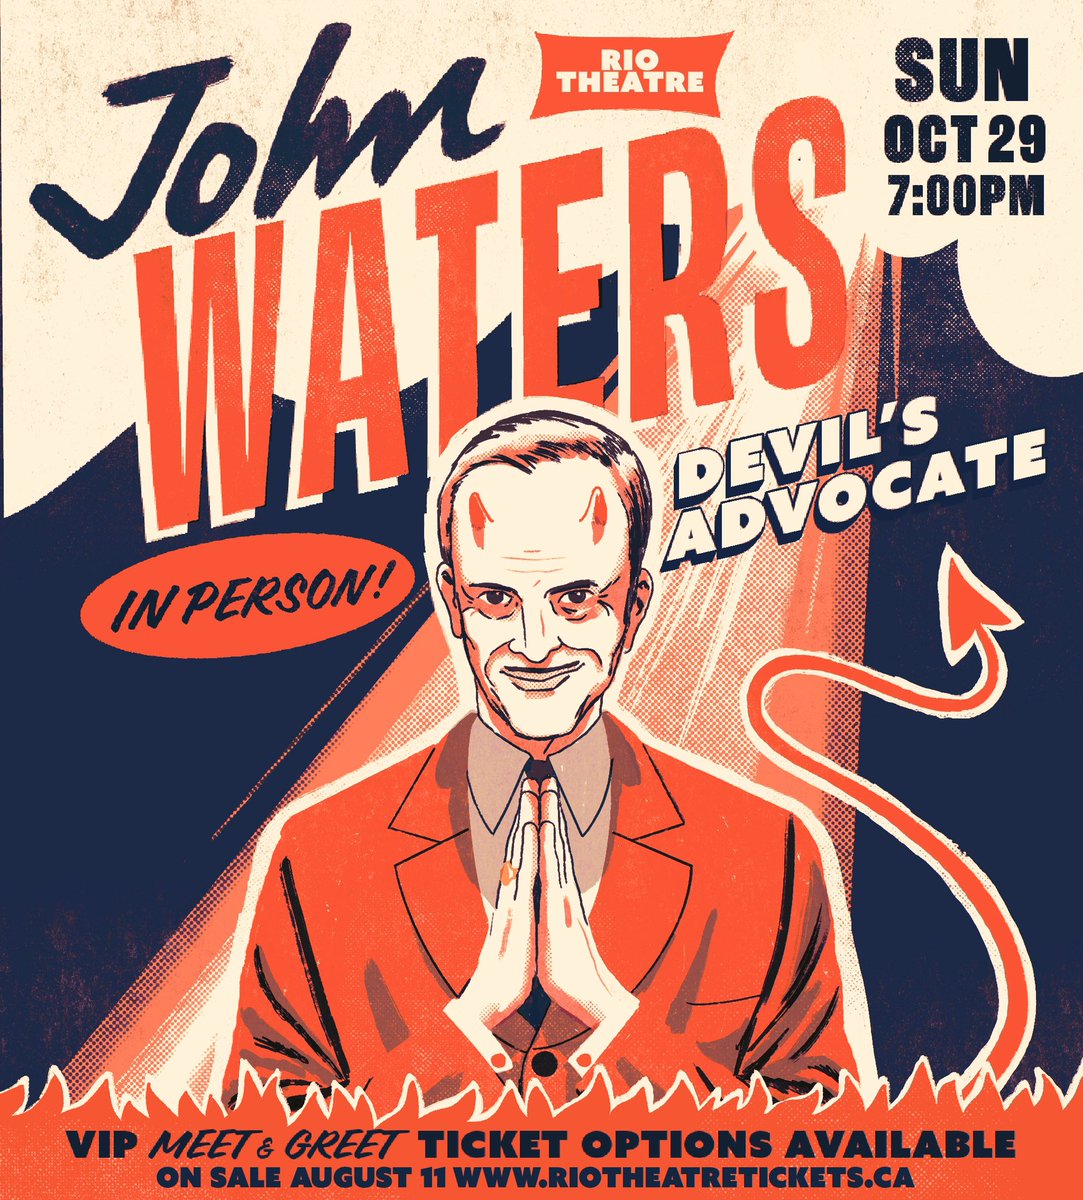 WOW! Tickets for JOHN WATERS: Devil’s Advocate live on our stage October 29 are moving faster than Tracy Turnblad did on Link Larkin! Don’t delay on this one, #Vancouver. (We’re almost sold out!) riotheatretickets.ca